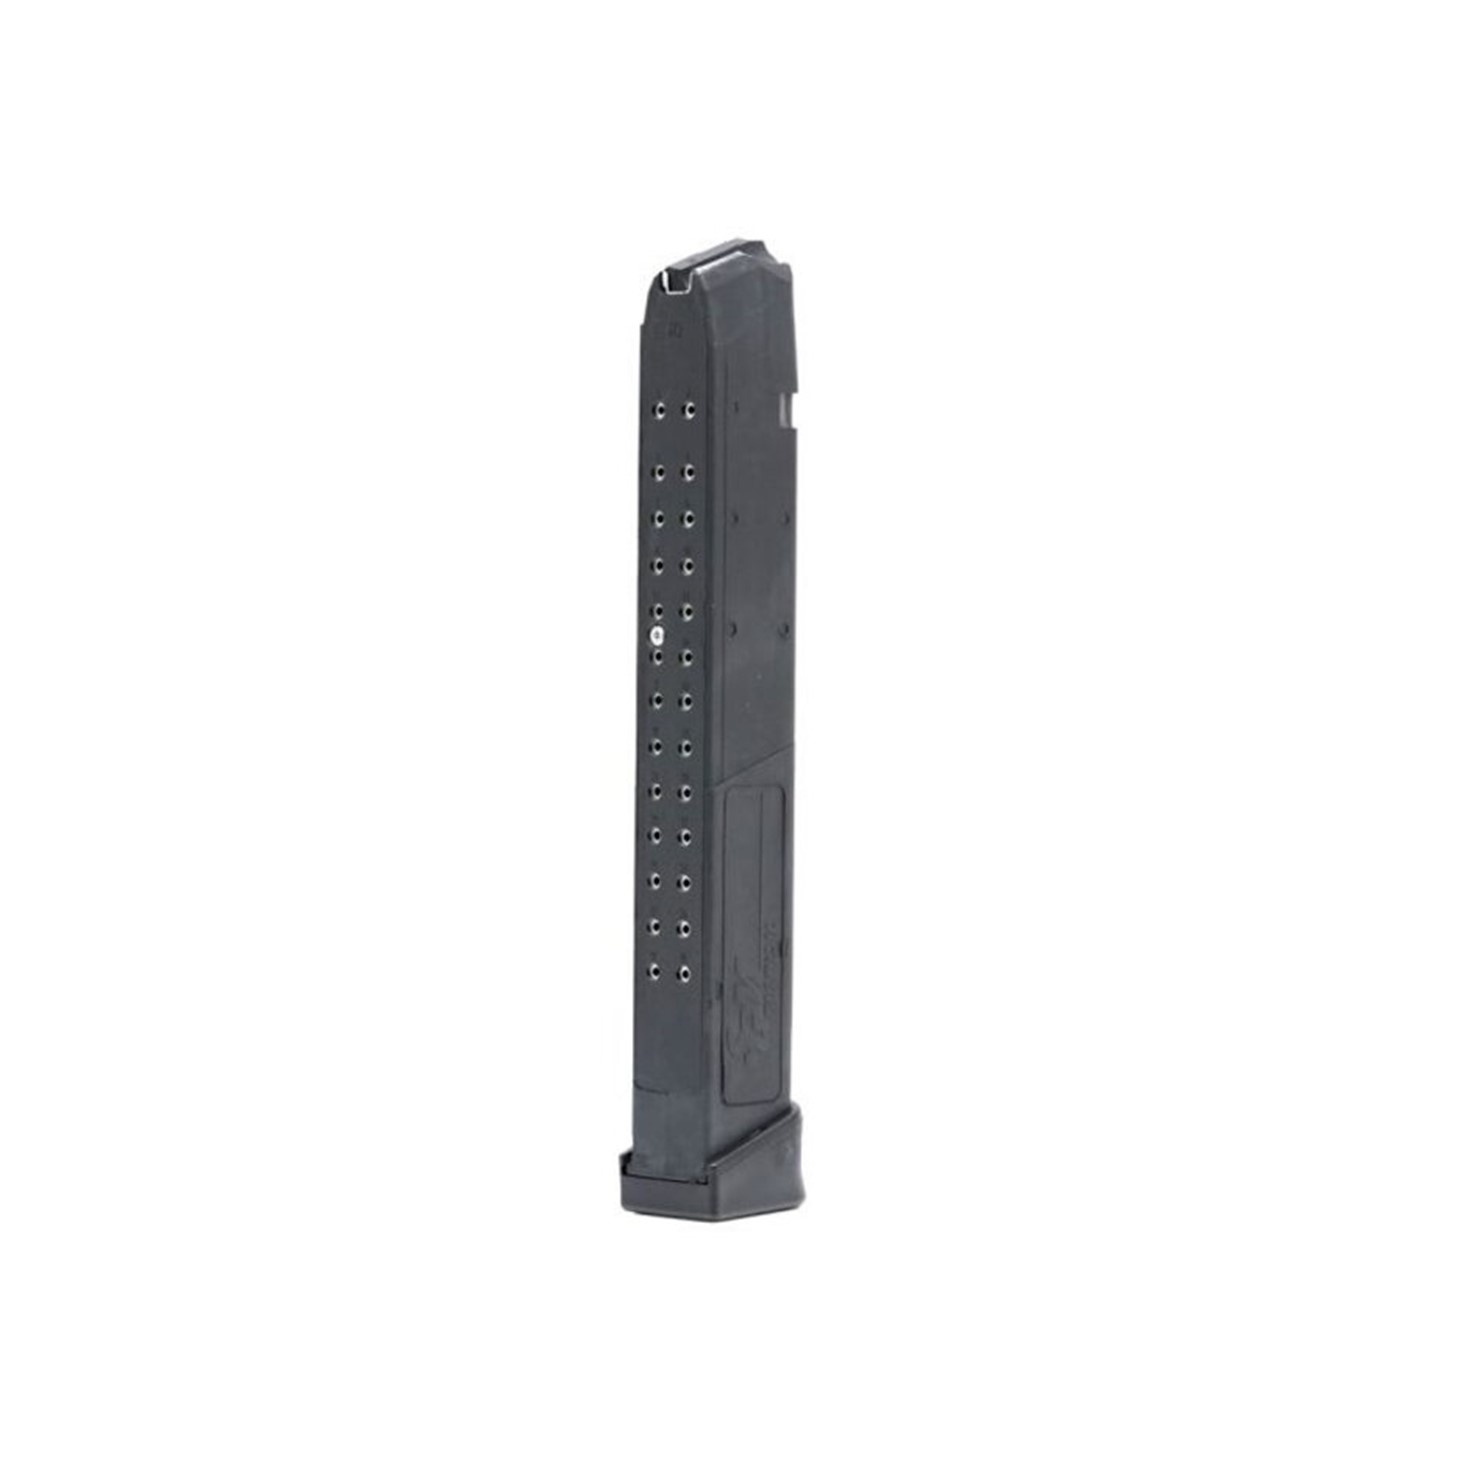 SGM 10 mm Glock Compatible Mag , 10 Rounds